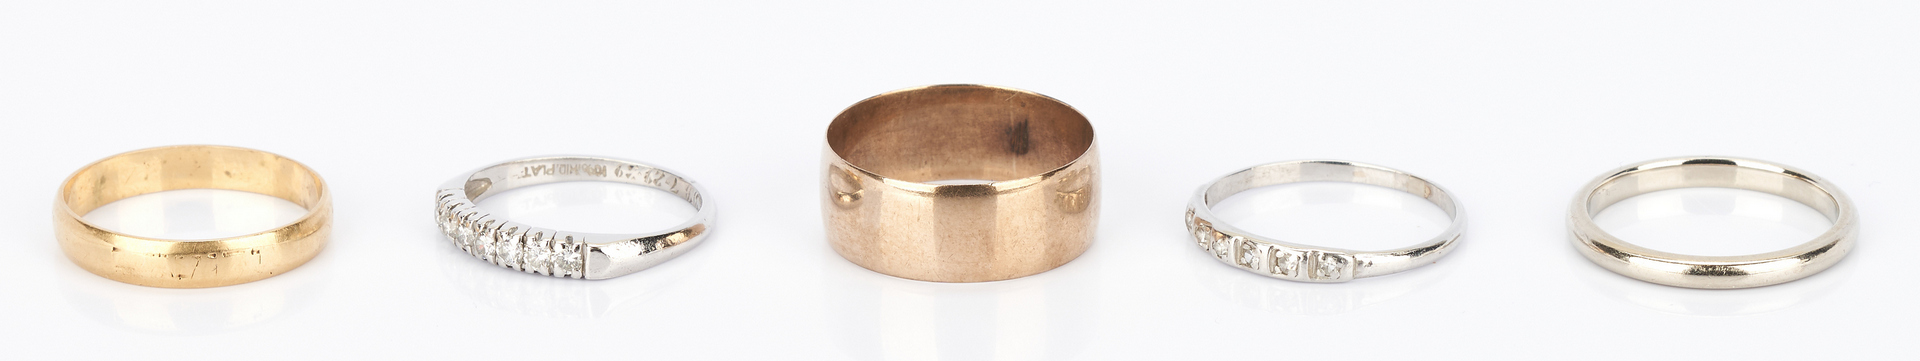 Lot 1037: 5 Gold and Platinum Wedding Rings